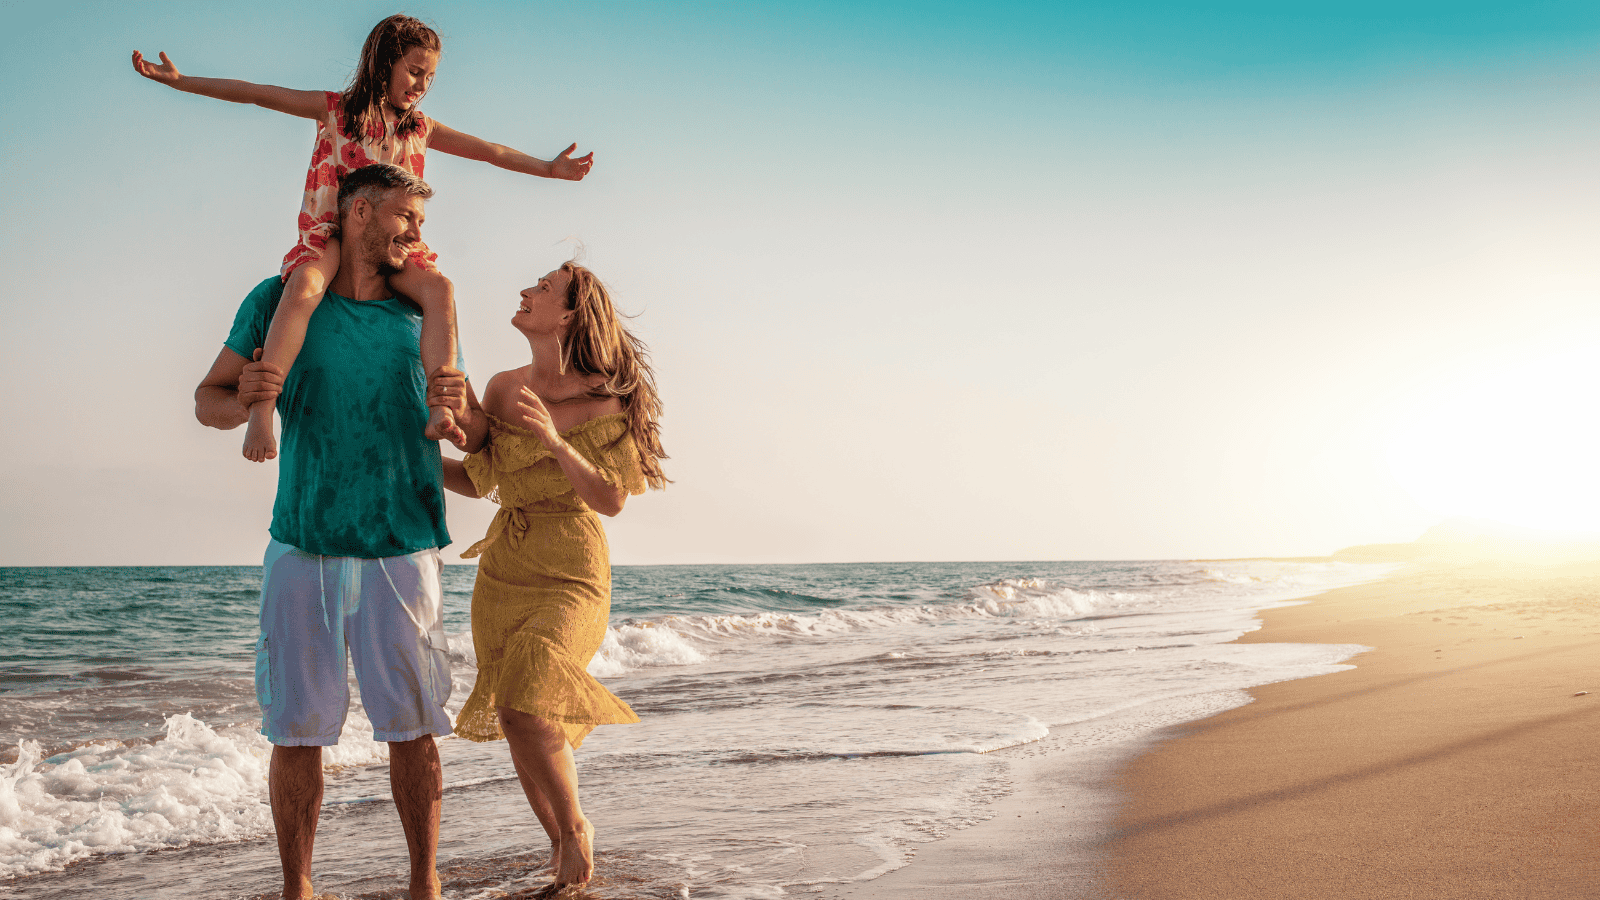 <p>The cost of a family trip can quickly skyrocket between transportation, accommodations, food, and activities. <a href="https://whatthefab.com/way-to-save-money-on-family-vacations.html" rel="follow">Money-saving travel hacks</a> can help you budget for family vacations without sacrificing fun.</p>